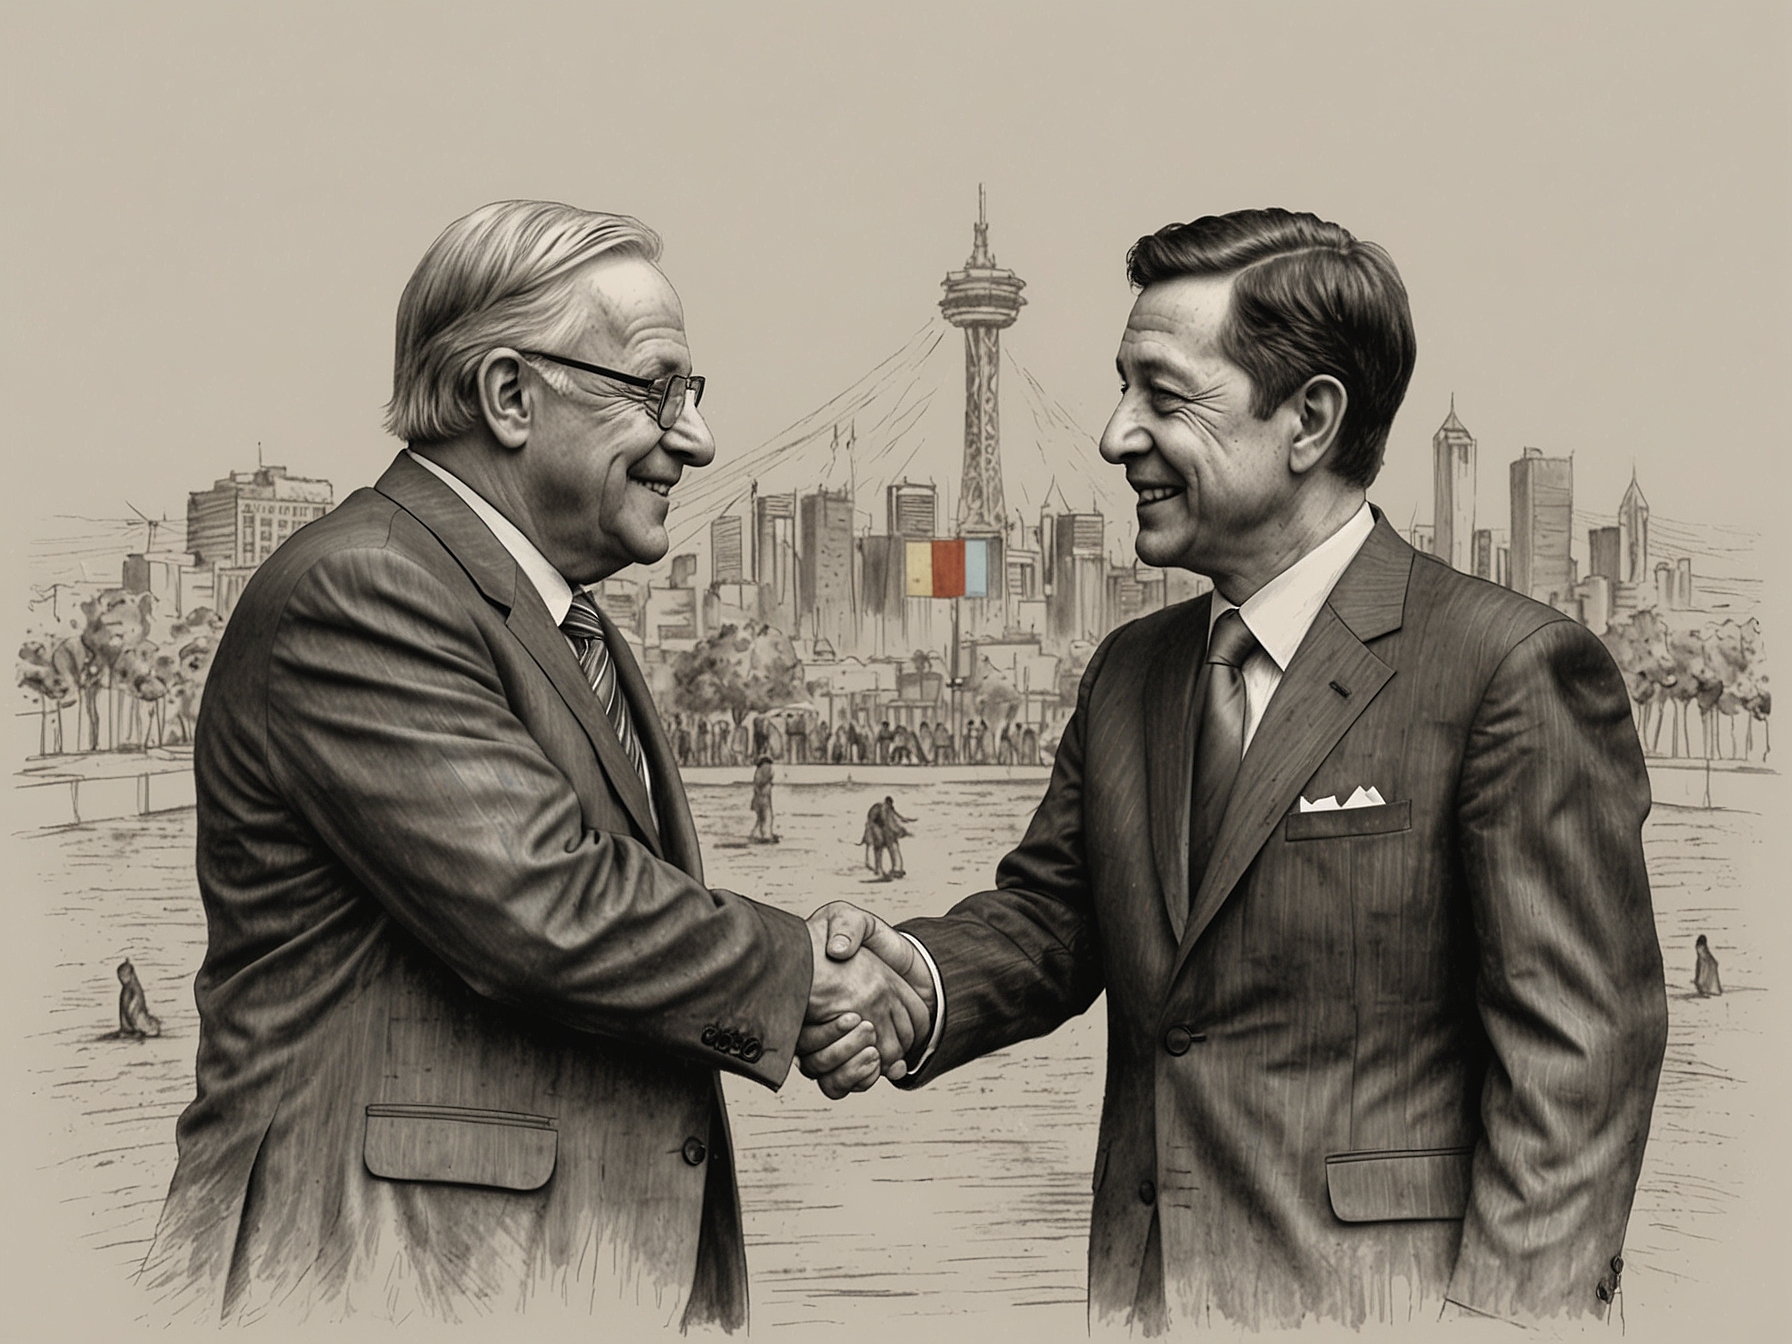 A depiction of international leaders shaking hands, symbolizing the need for international cooperation to address the root causes of migration and foster global stability.